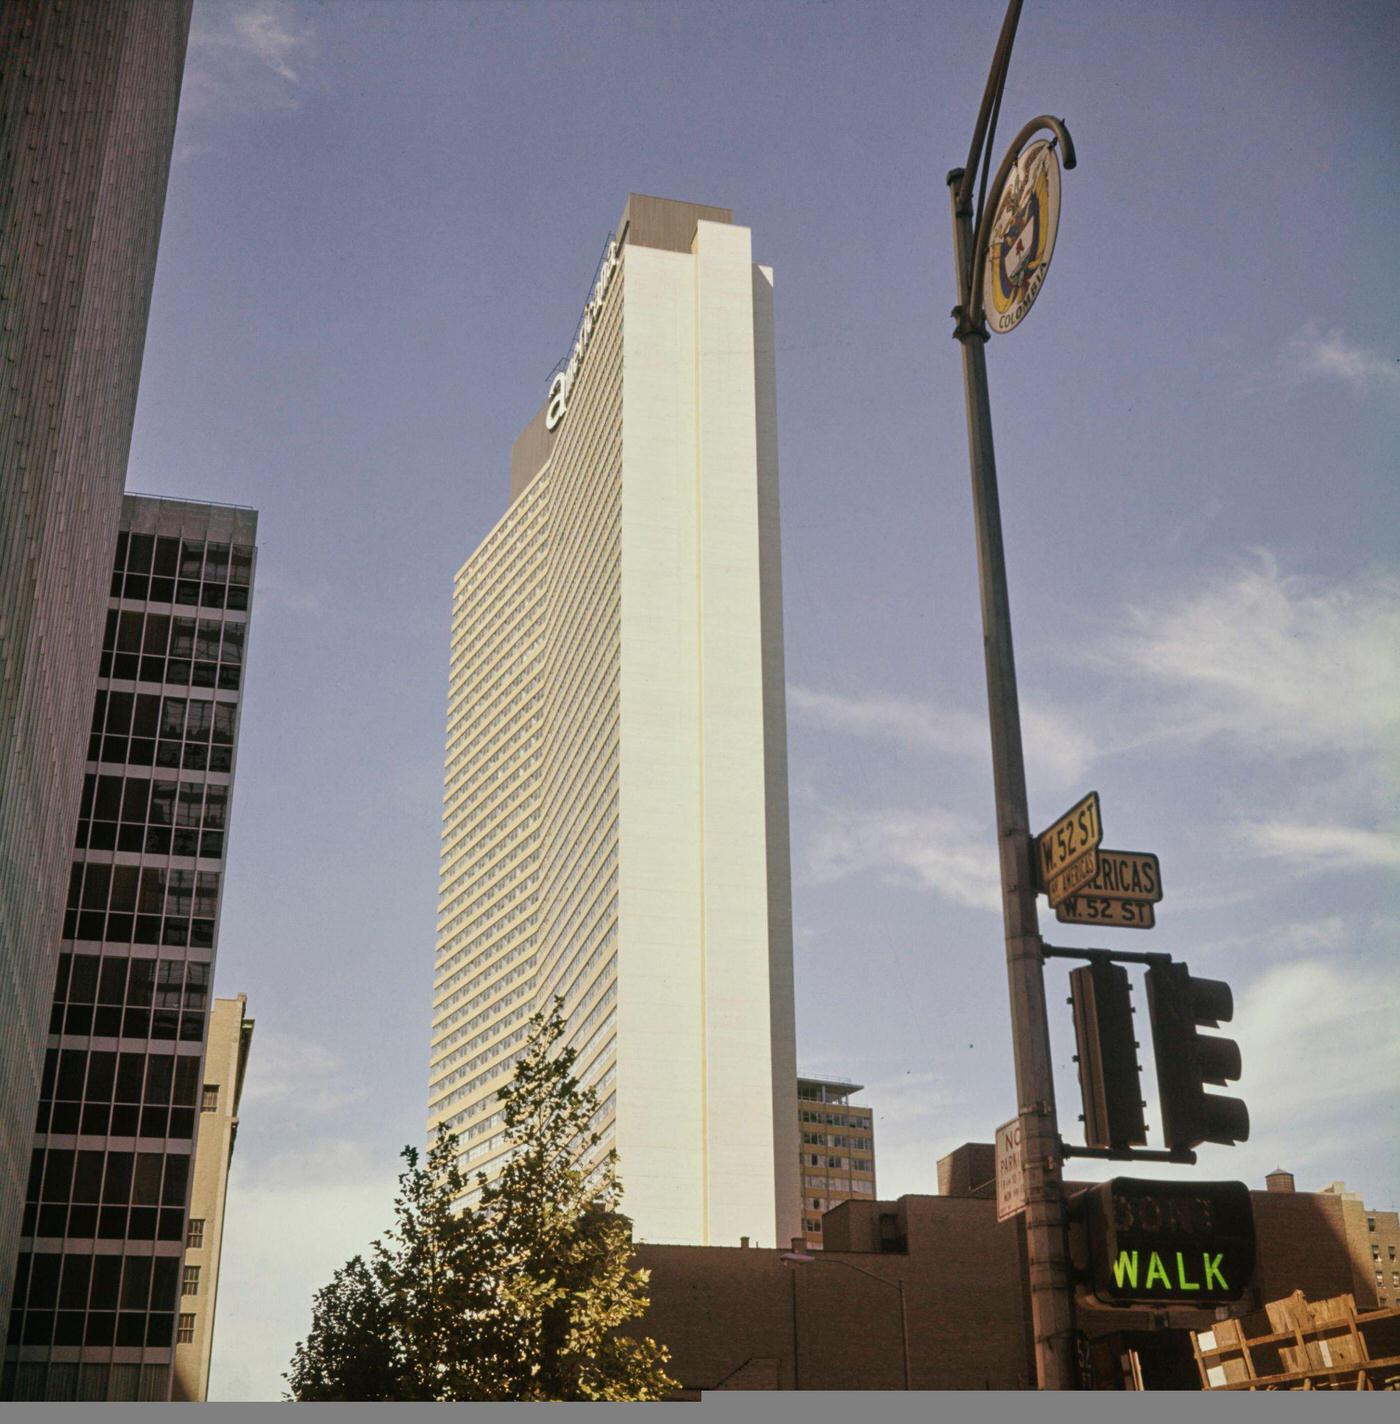 View Of Americana Hotel, Later Renamed Sheraton New York Times Square Hotel, Manhattan, 1962